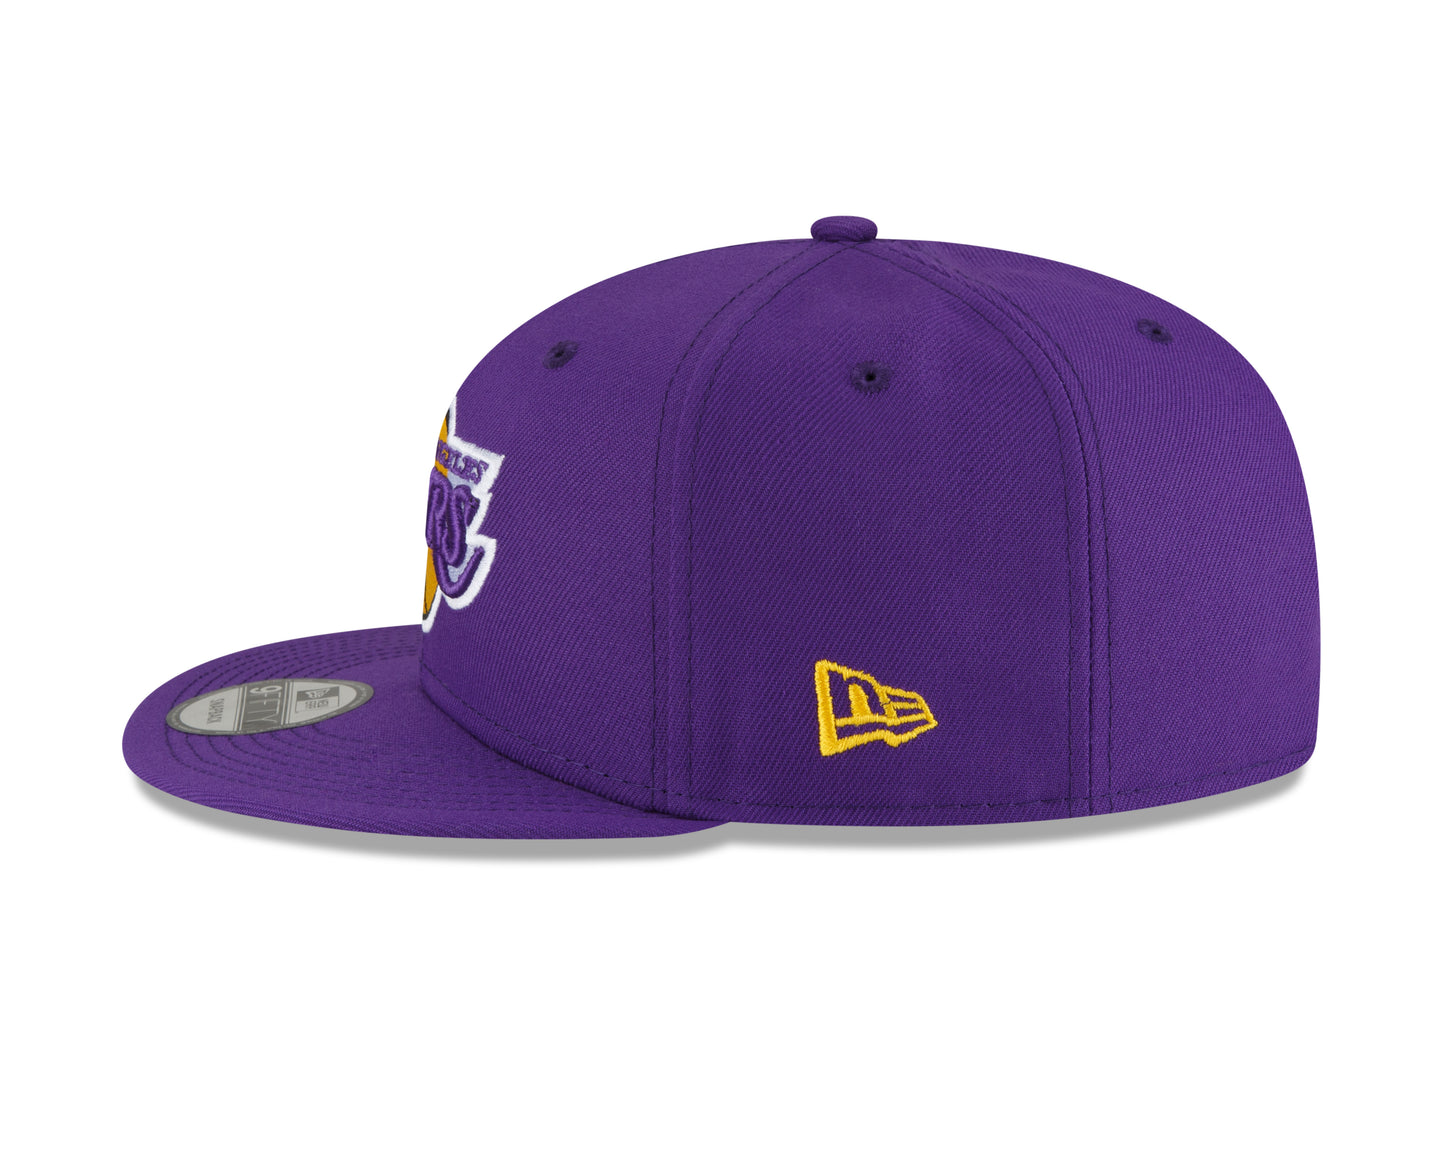 Los Angeles Lakers Authentic Back Half Series 9FIFTY Snap Back Hat - Purple